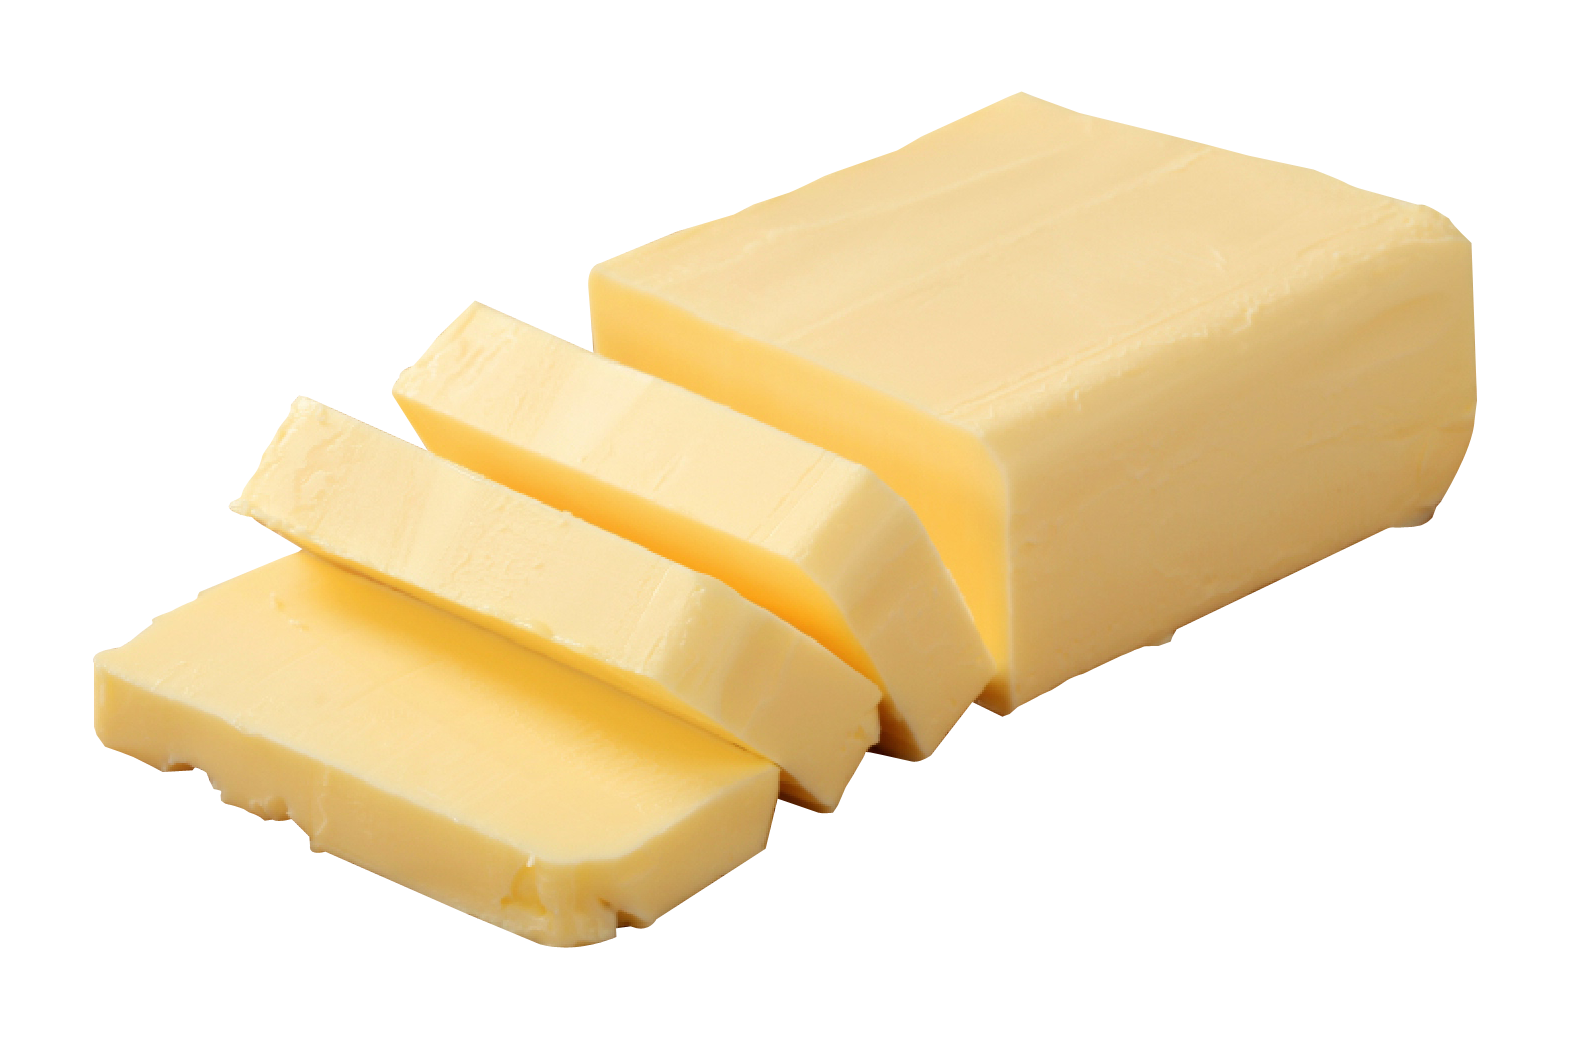 pats of butter